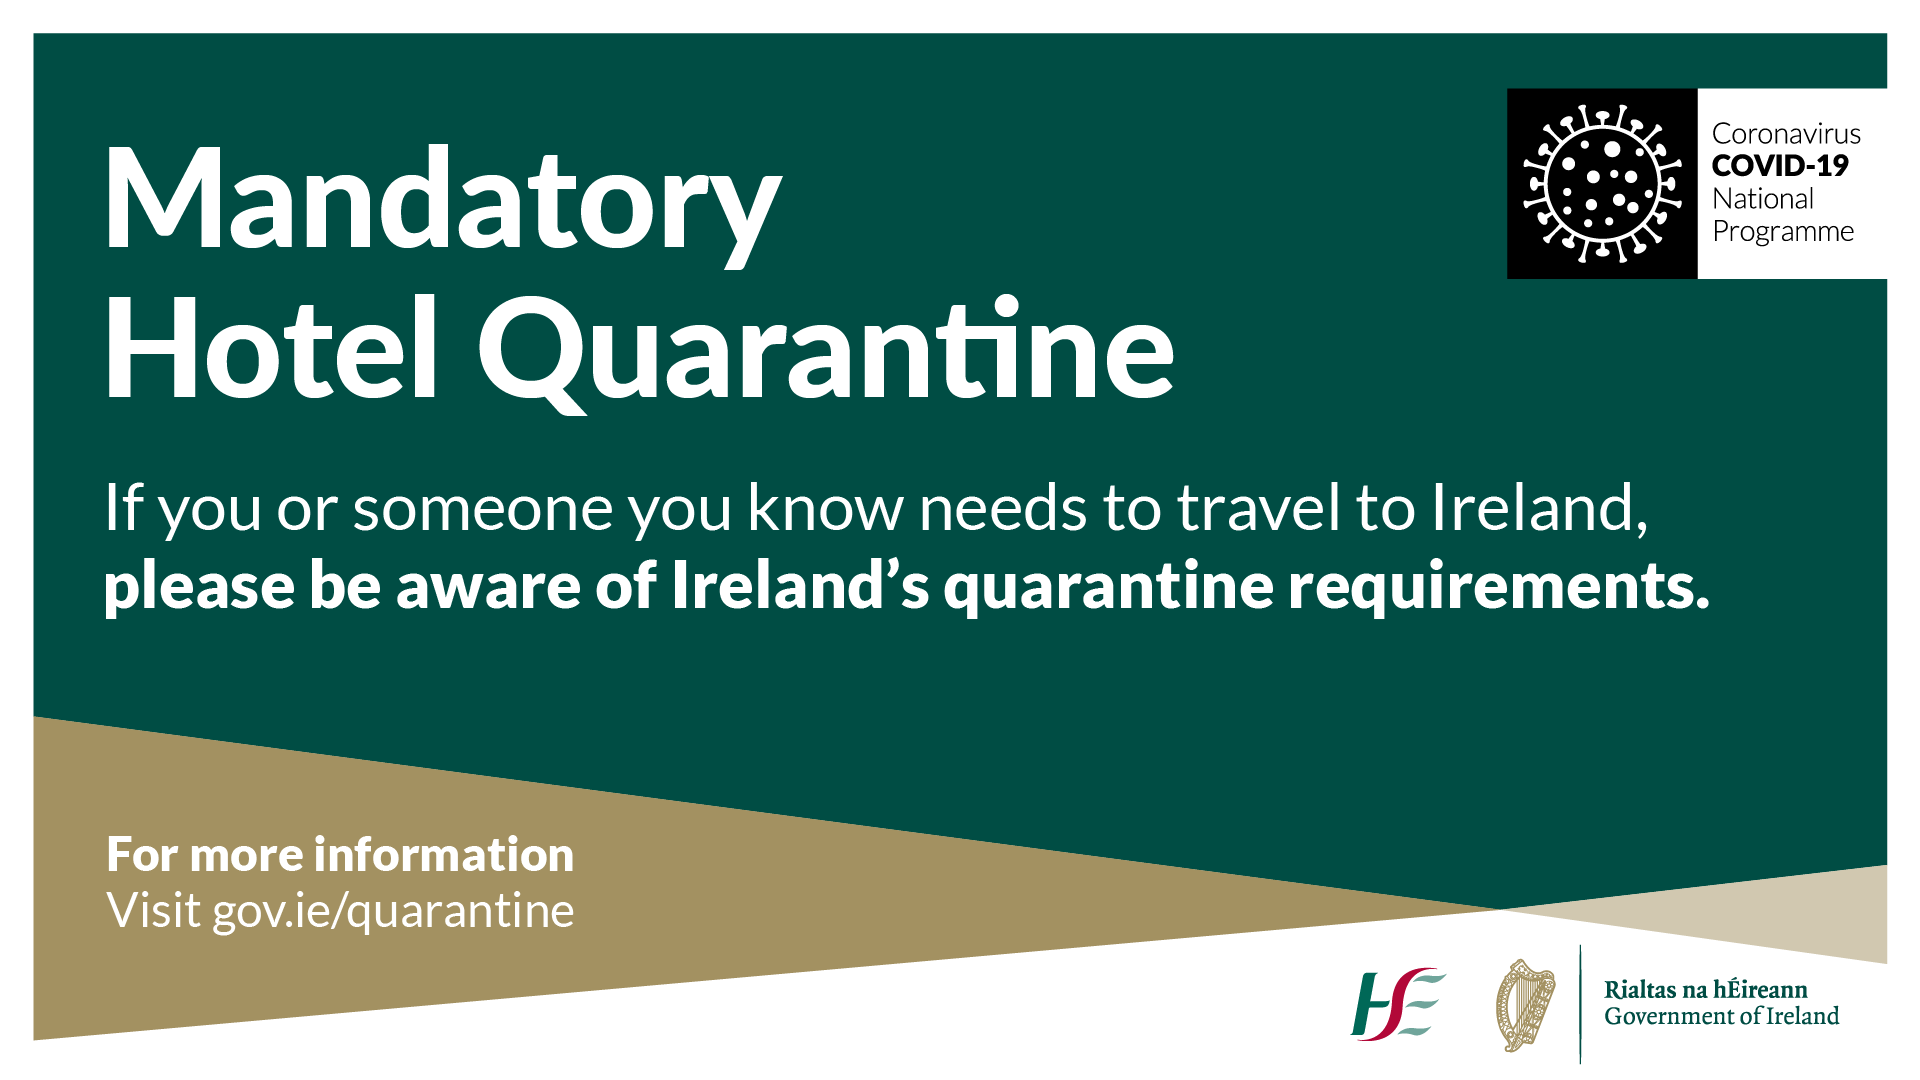 Mandatory Hotel Quarantine (MHQ) for travellers from high-risk countries